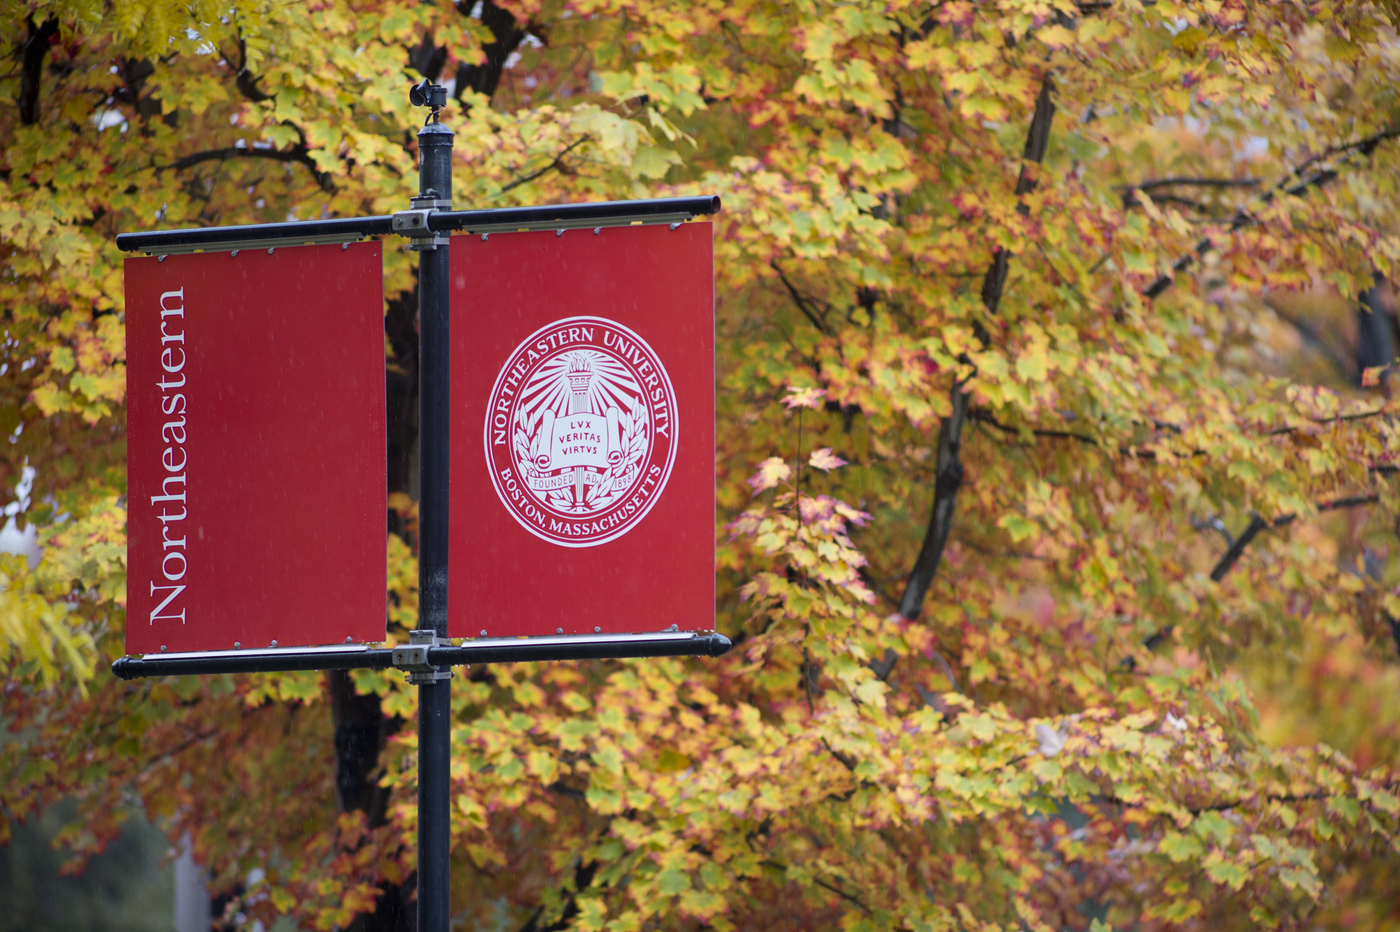 Image of Northeastern banners hanging off of a pole on a rainy fall day